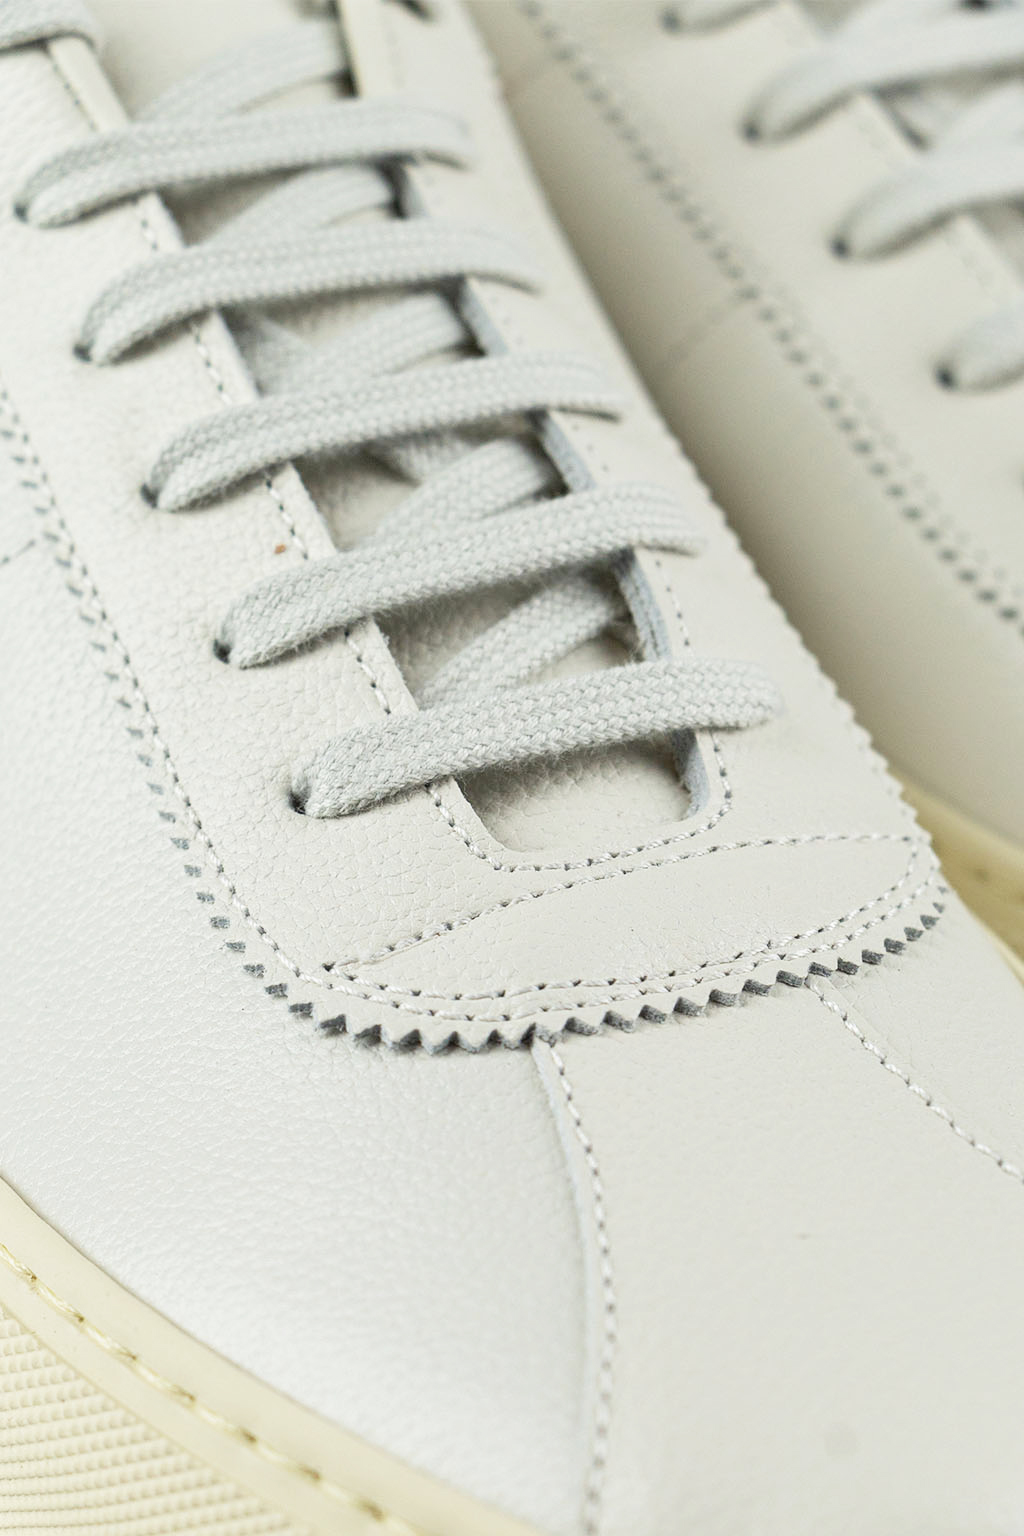 Common Projects Tennis 77 - White